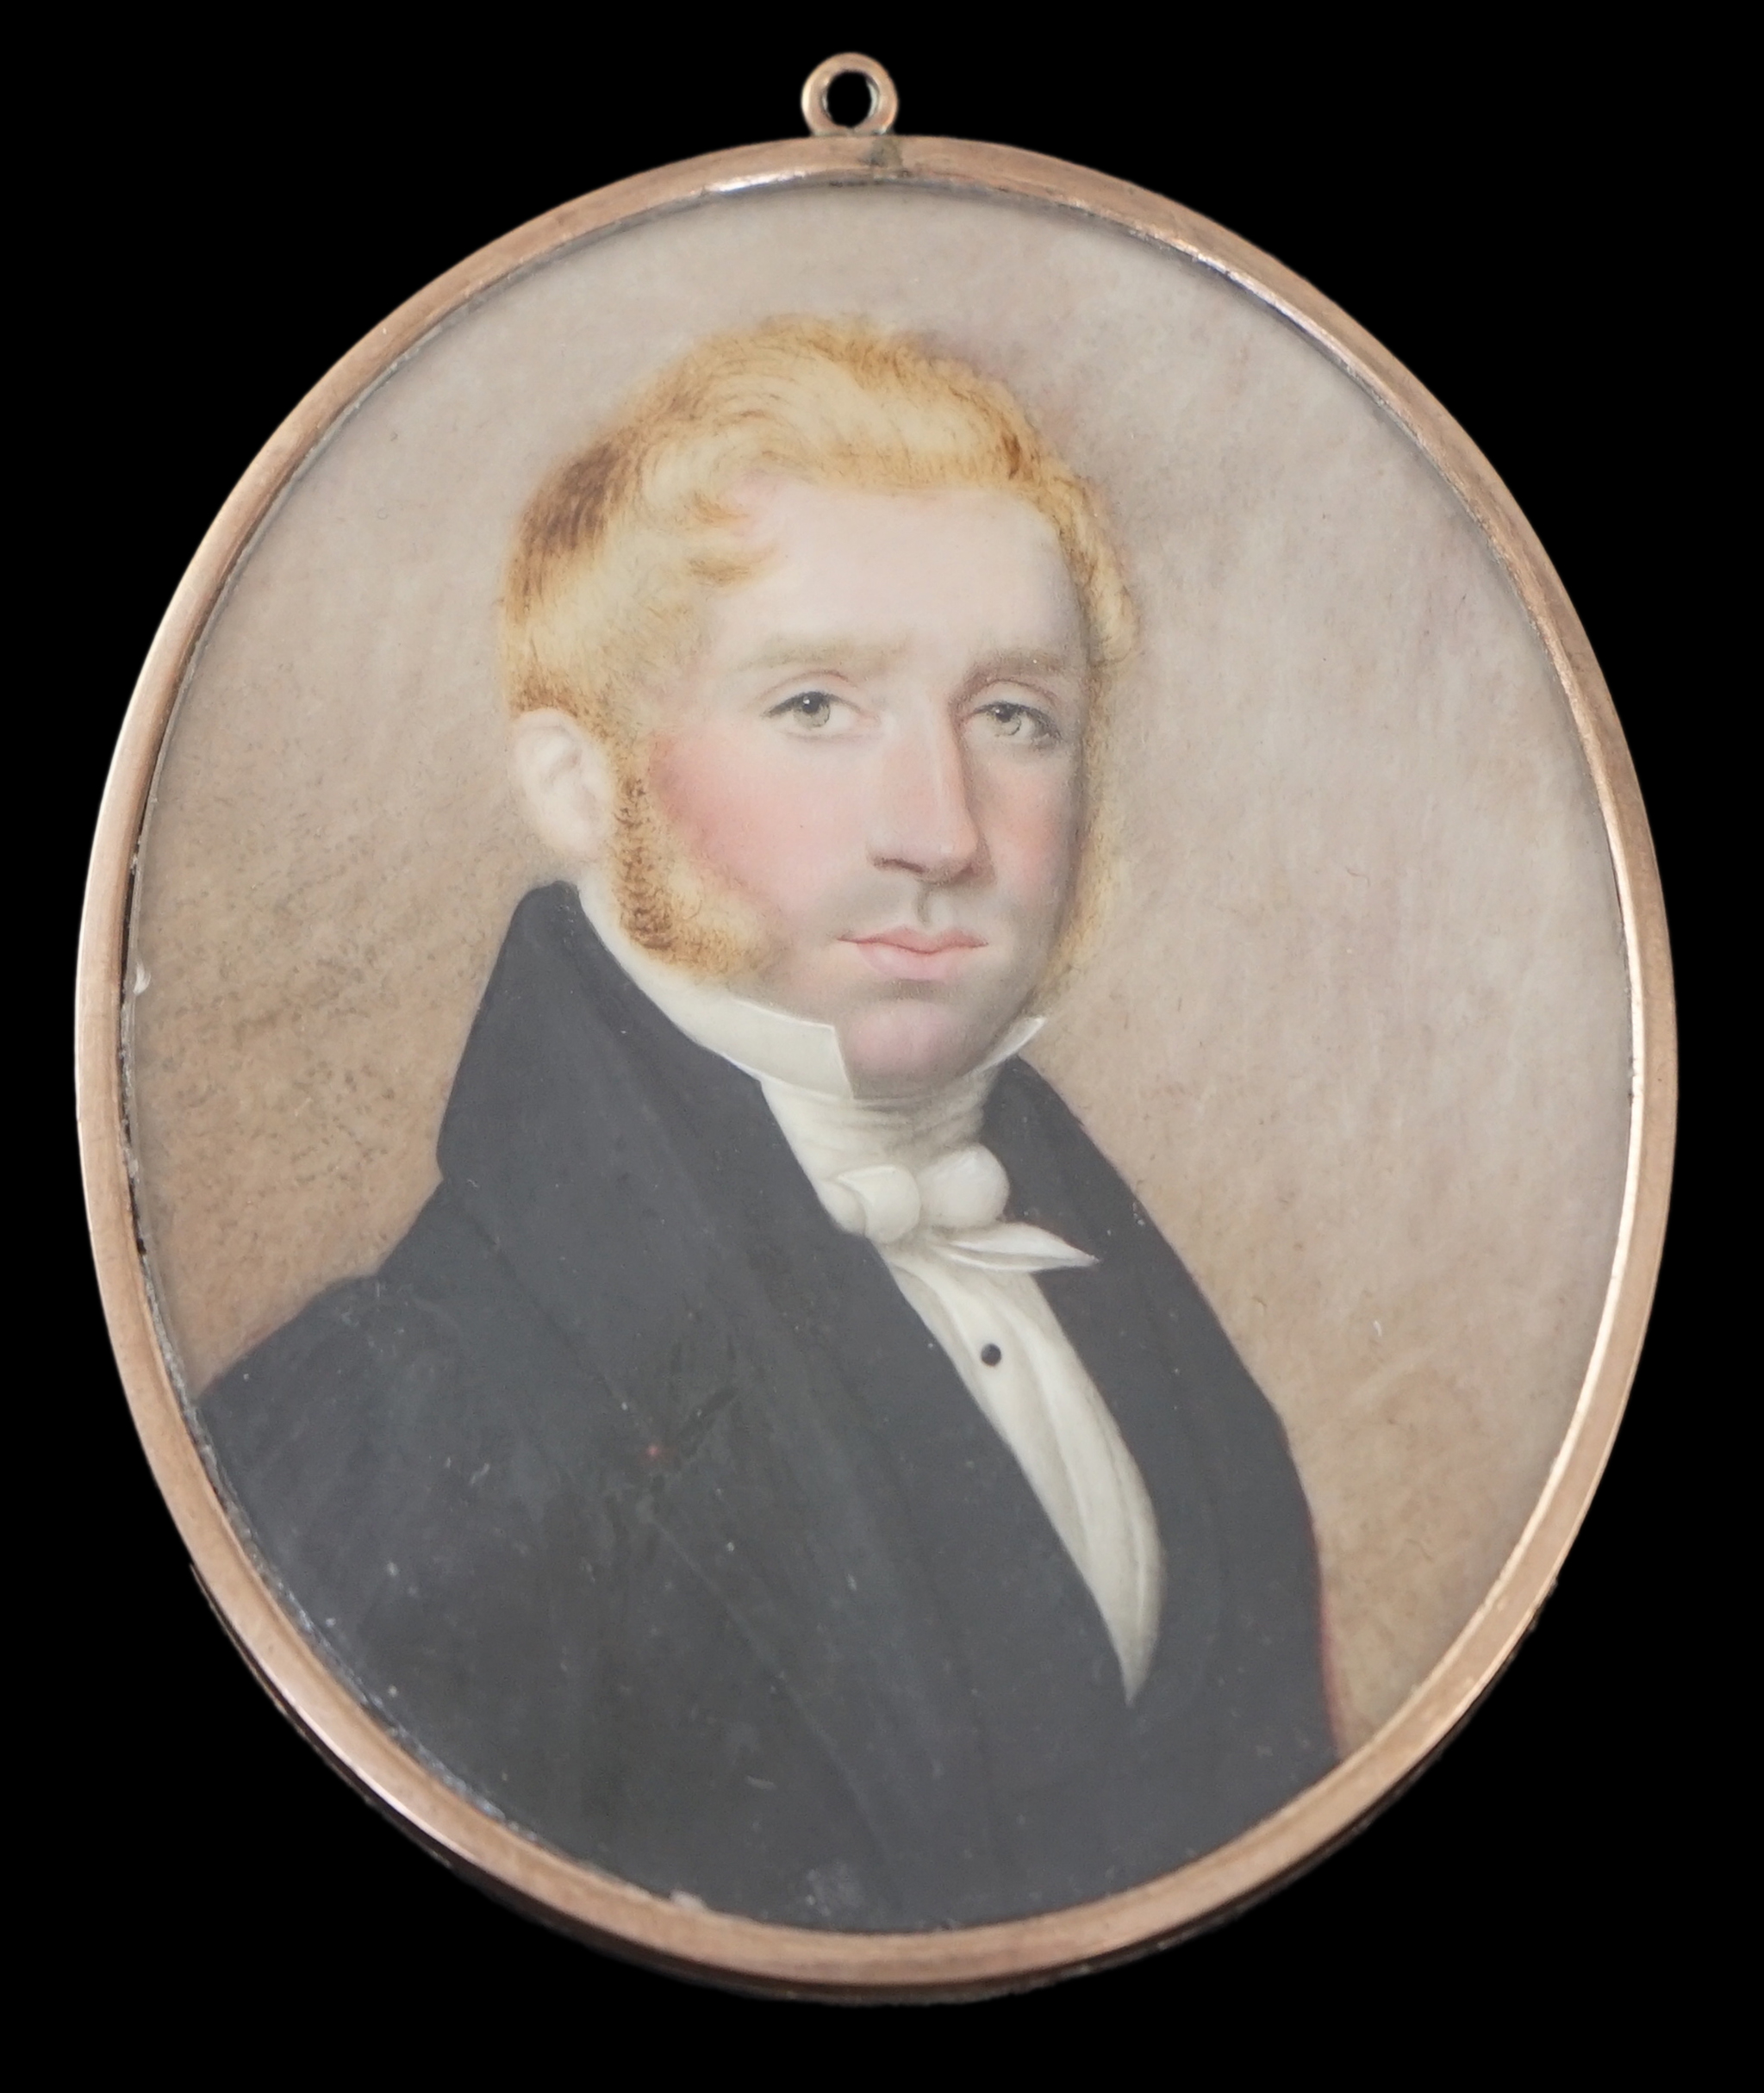 English School circa 1820, Portrait miniature of a red haired gentleman, watercolour on ivory, 7.8 x 6.4cm. CITES Submission reference 8G621R4F